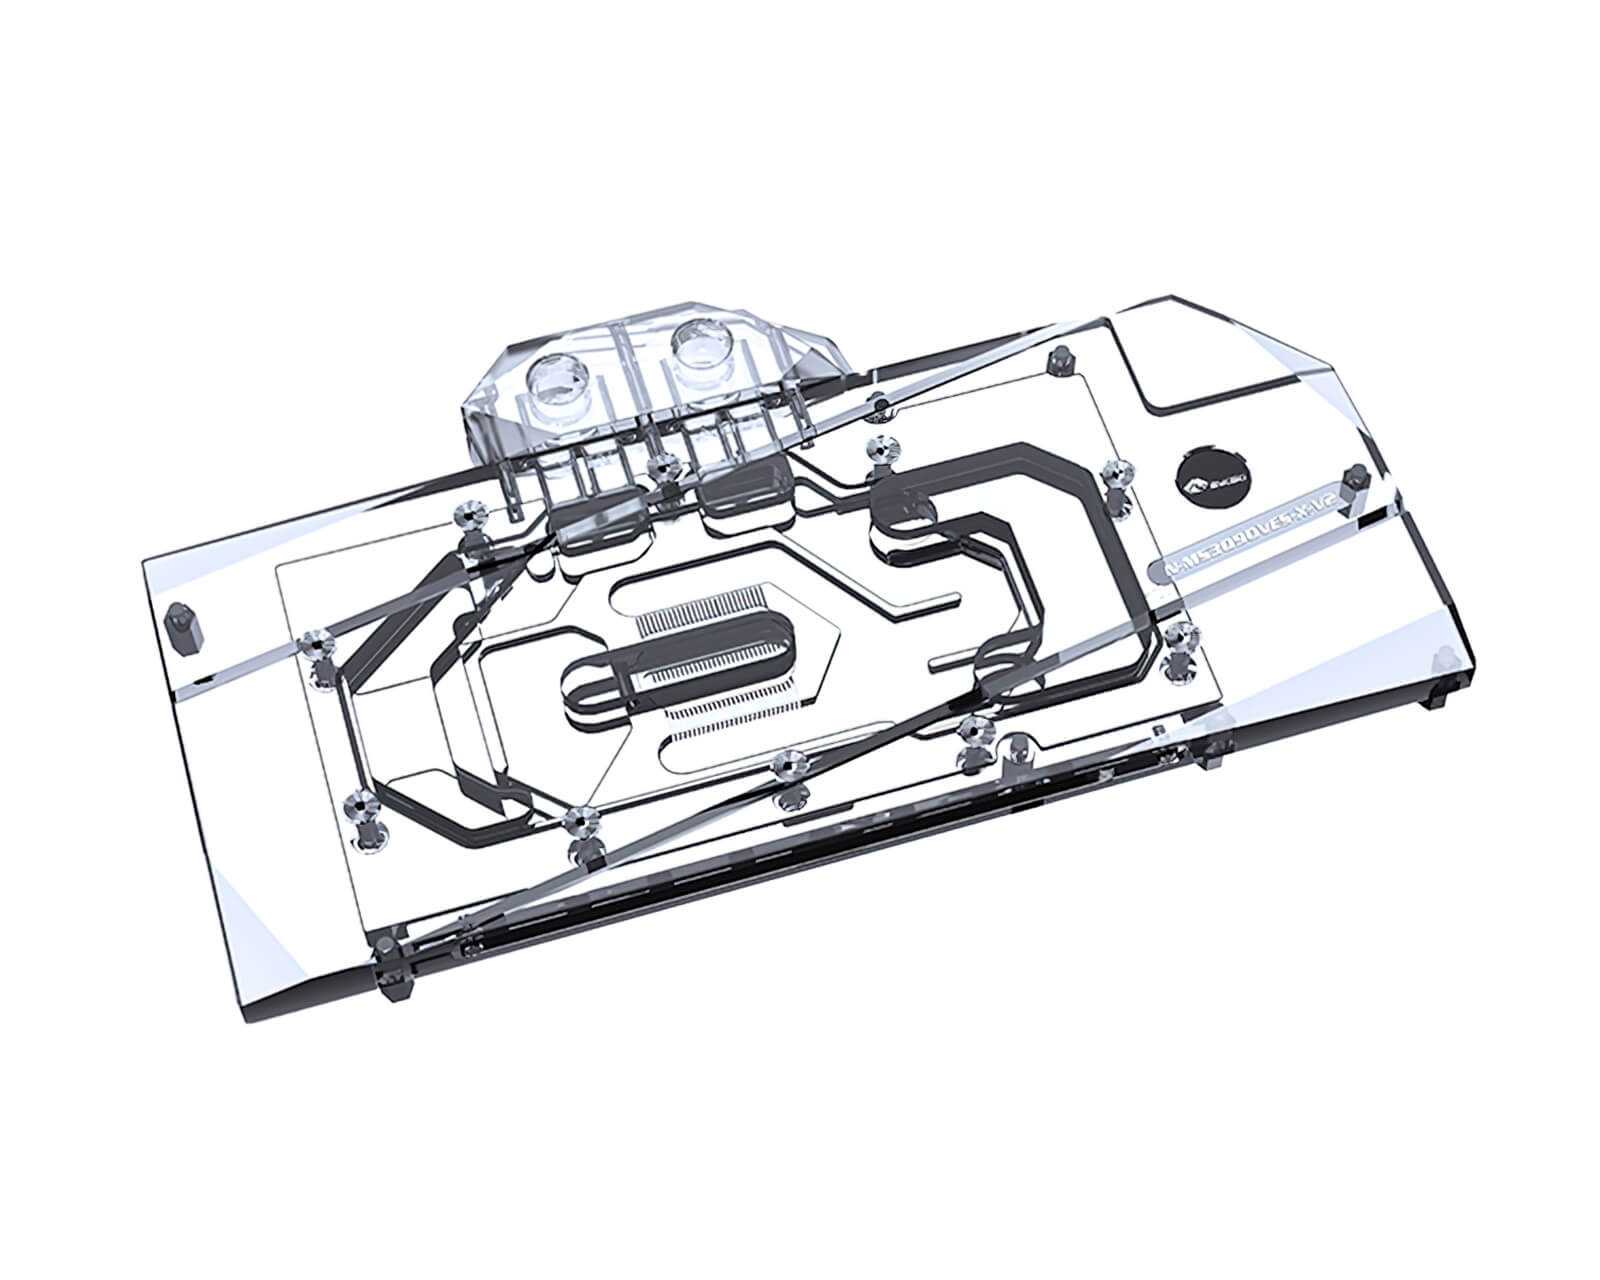 Bykski Full Coverage GPU Water Block and Backplate for MSI RTX 3090 VENTUS (N-MS3090VES-X-V2) - PrimoChill - KEEPING IT COOL